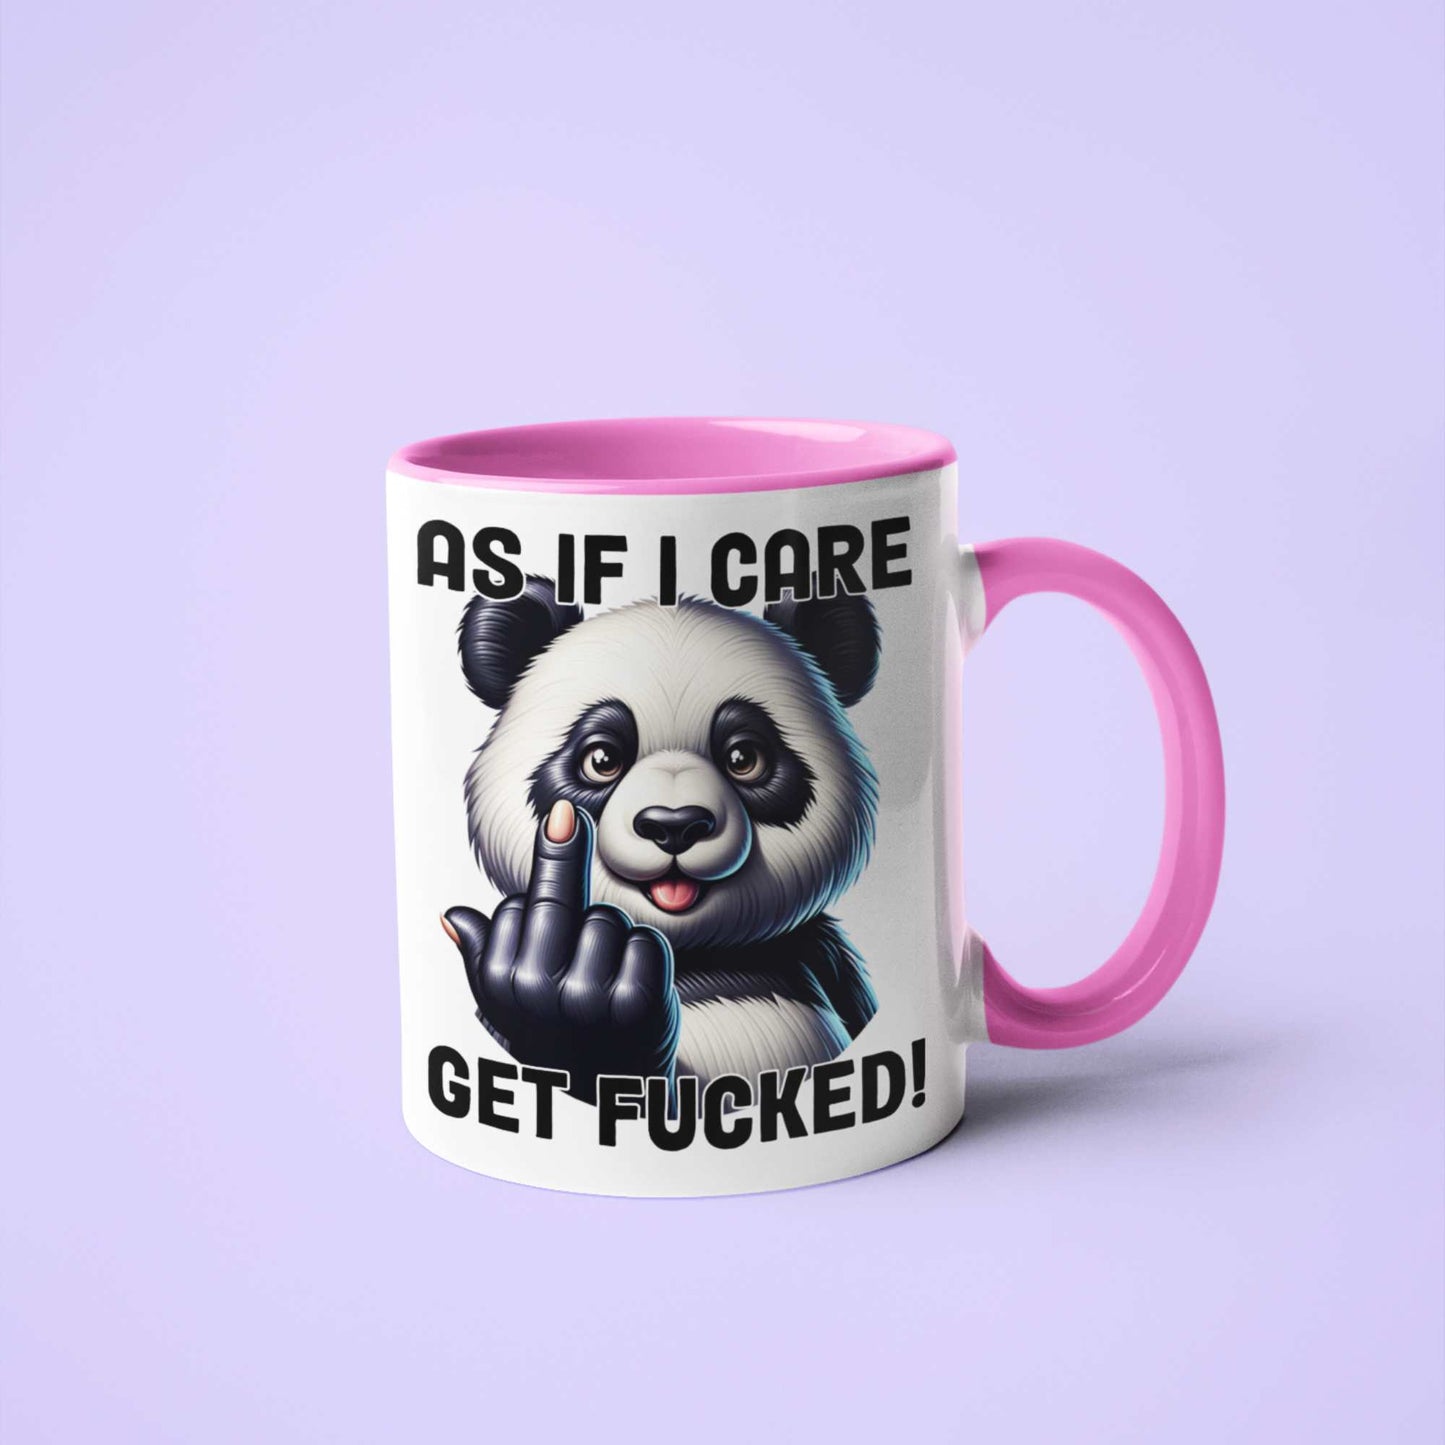 As if I care Get Fucked Rude Coffee Mug Gifts for Her Birthday